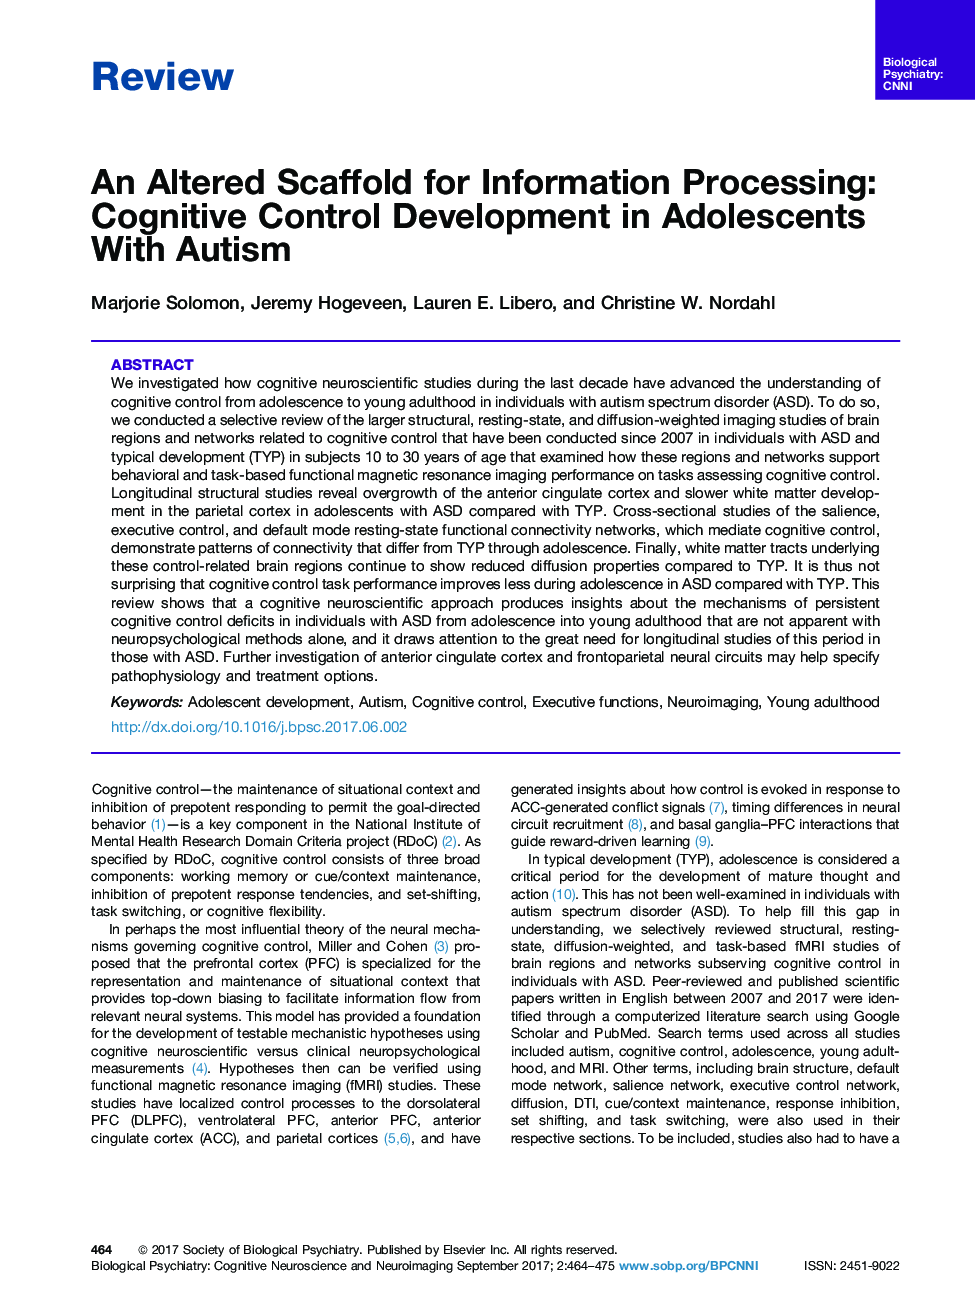 ReviewAn Altered Scaffold for Information Processing: Cognitive Control Development in Adolescents With Autism